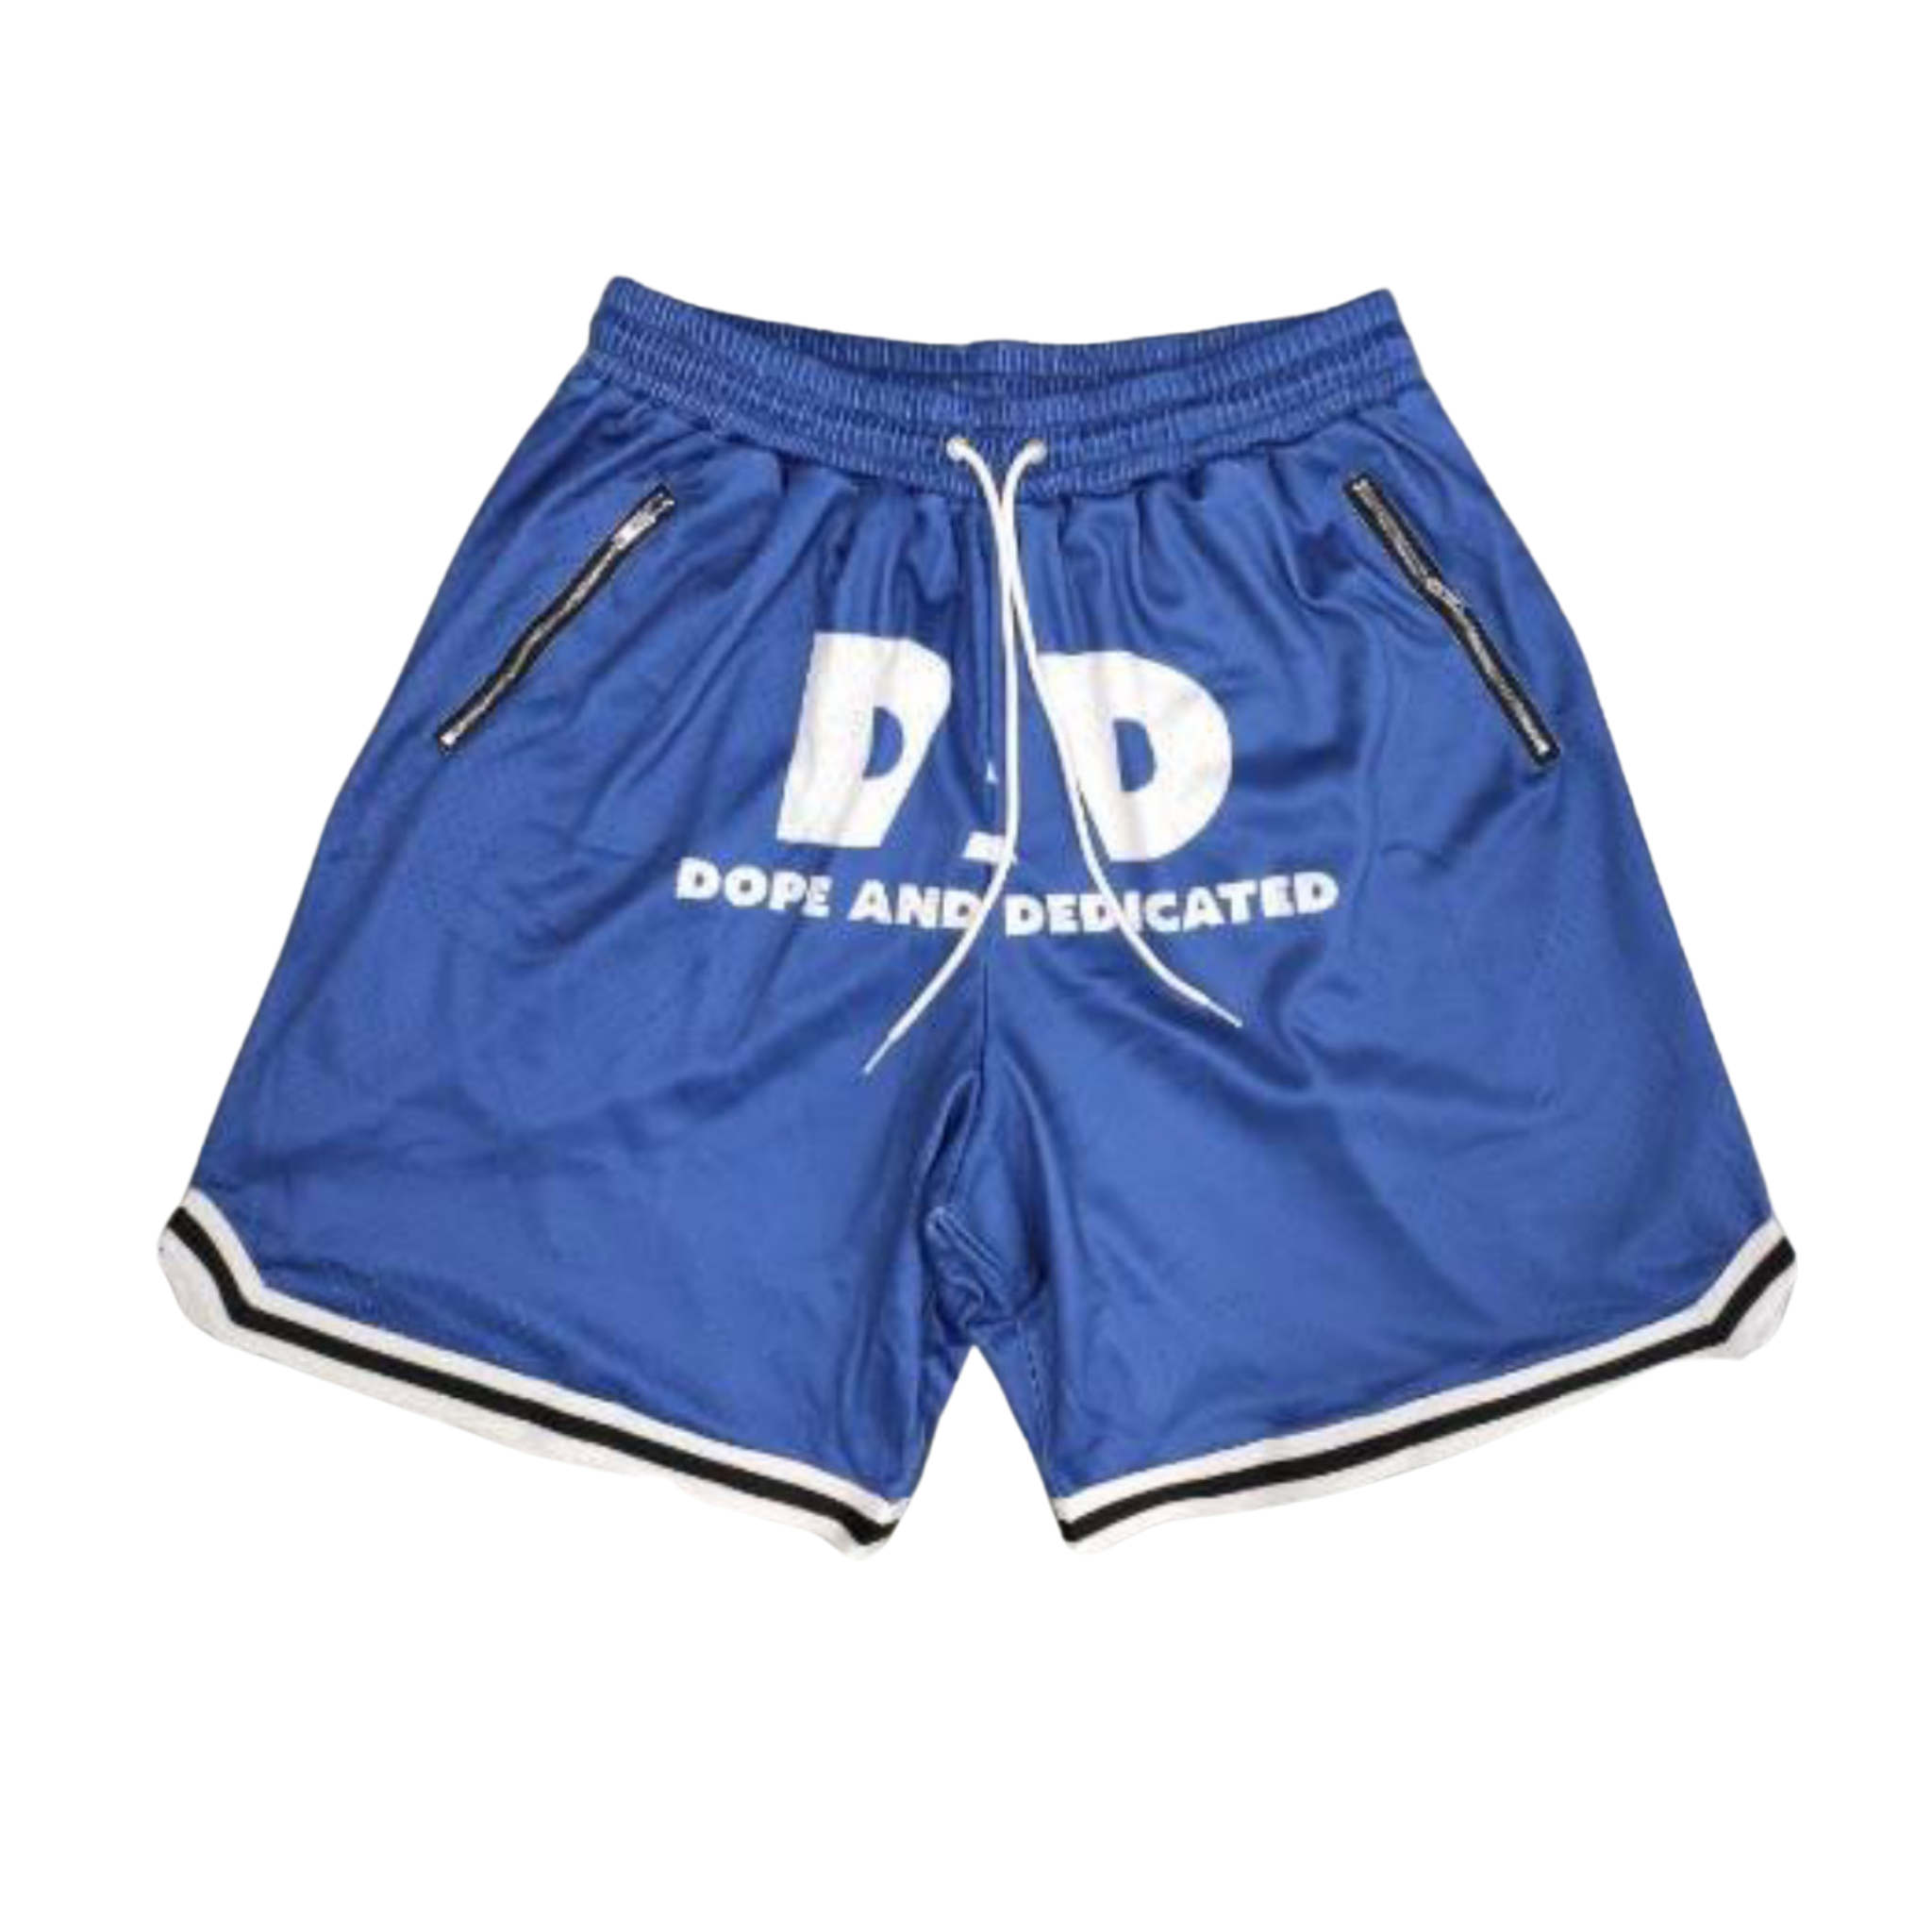 Dope Dad Shorts - Blue - Dope And Dedicated